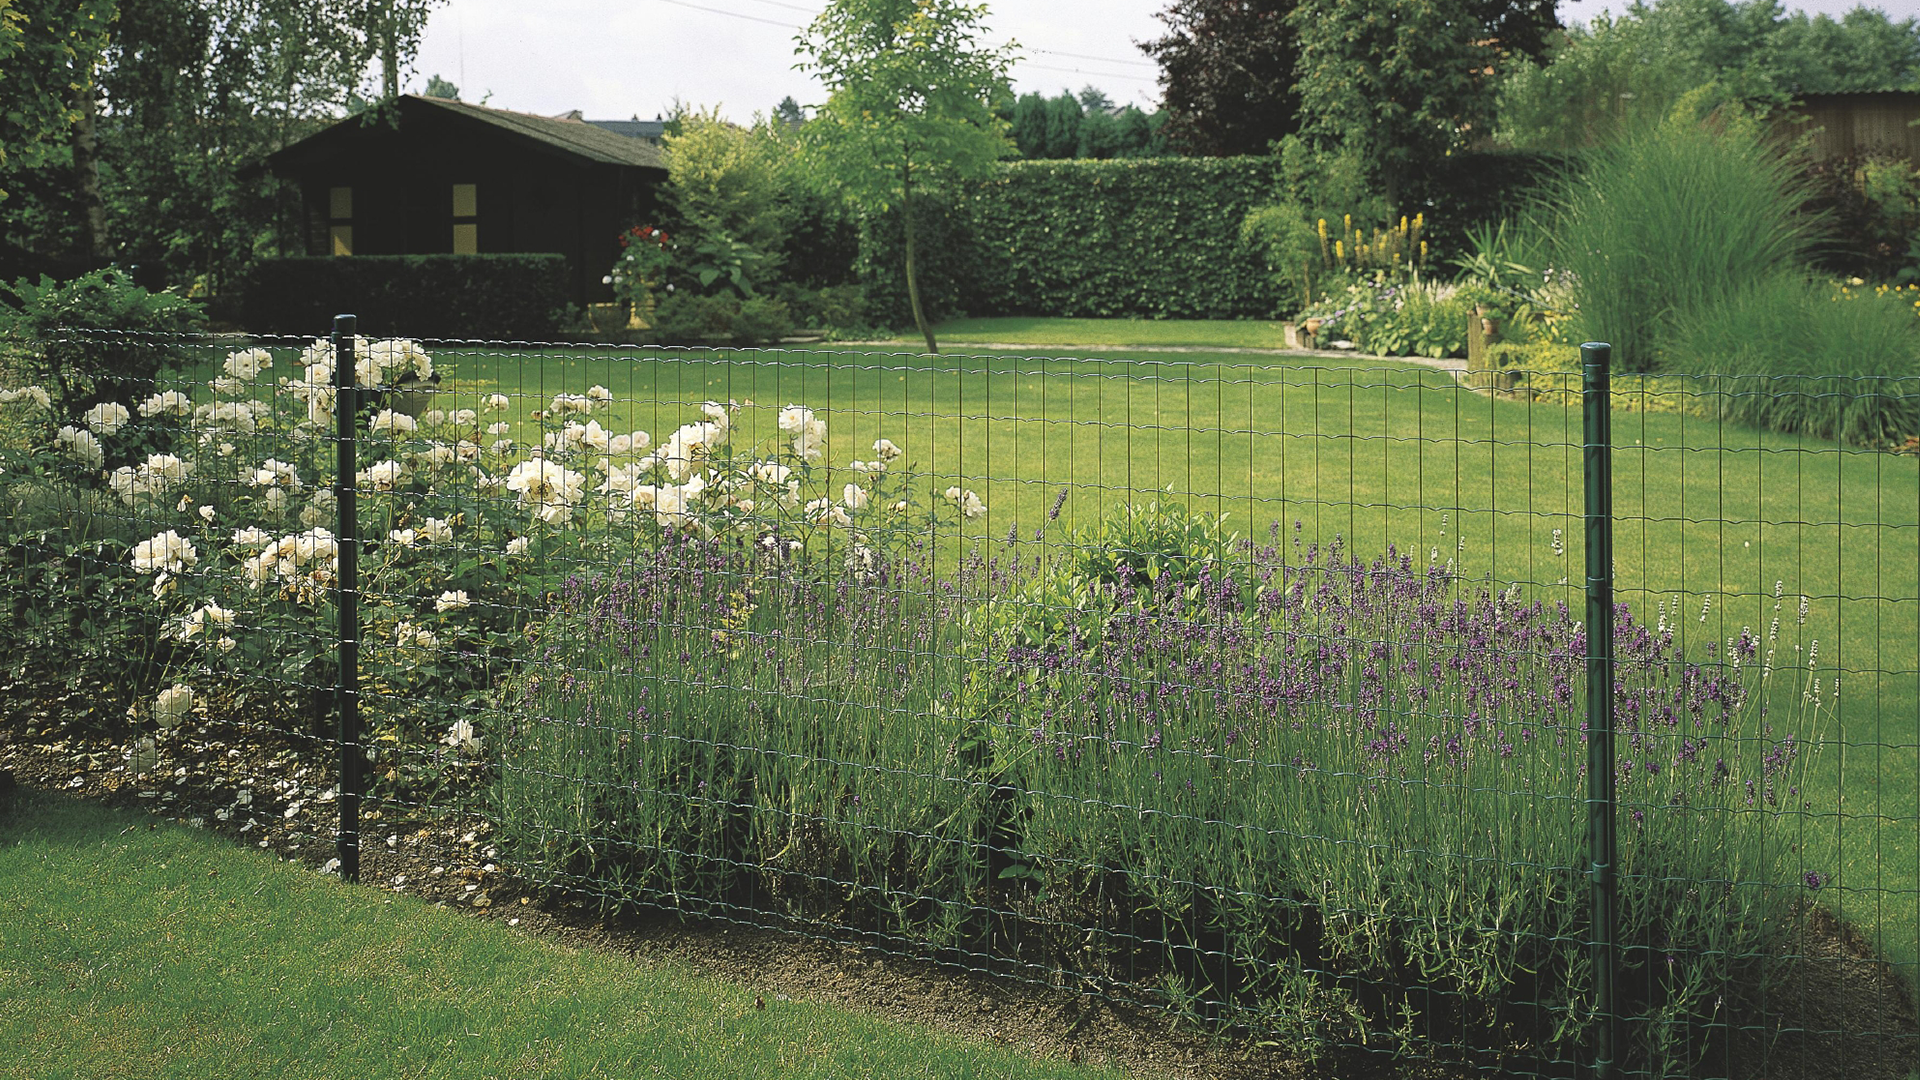 Partitioning Fences: Dividing Large Outdoor Spaces - blog | Betafence SA